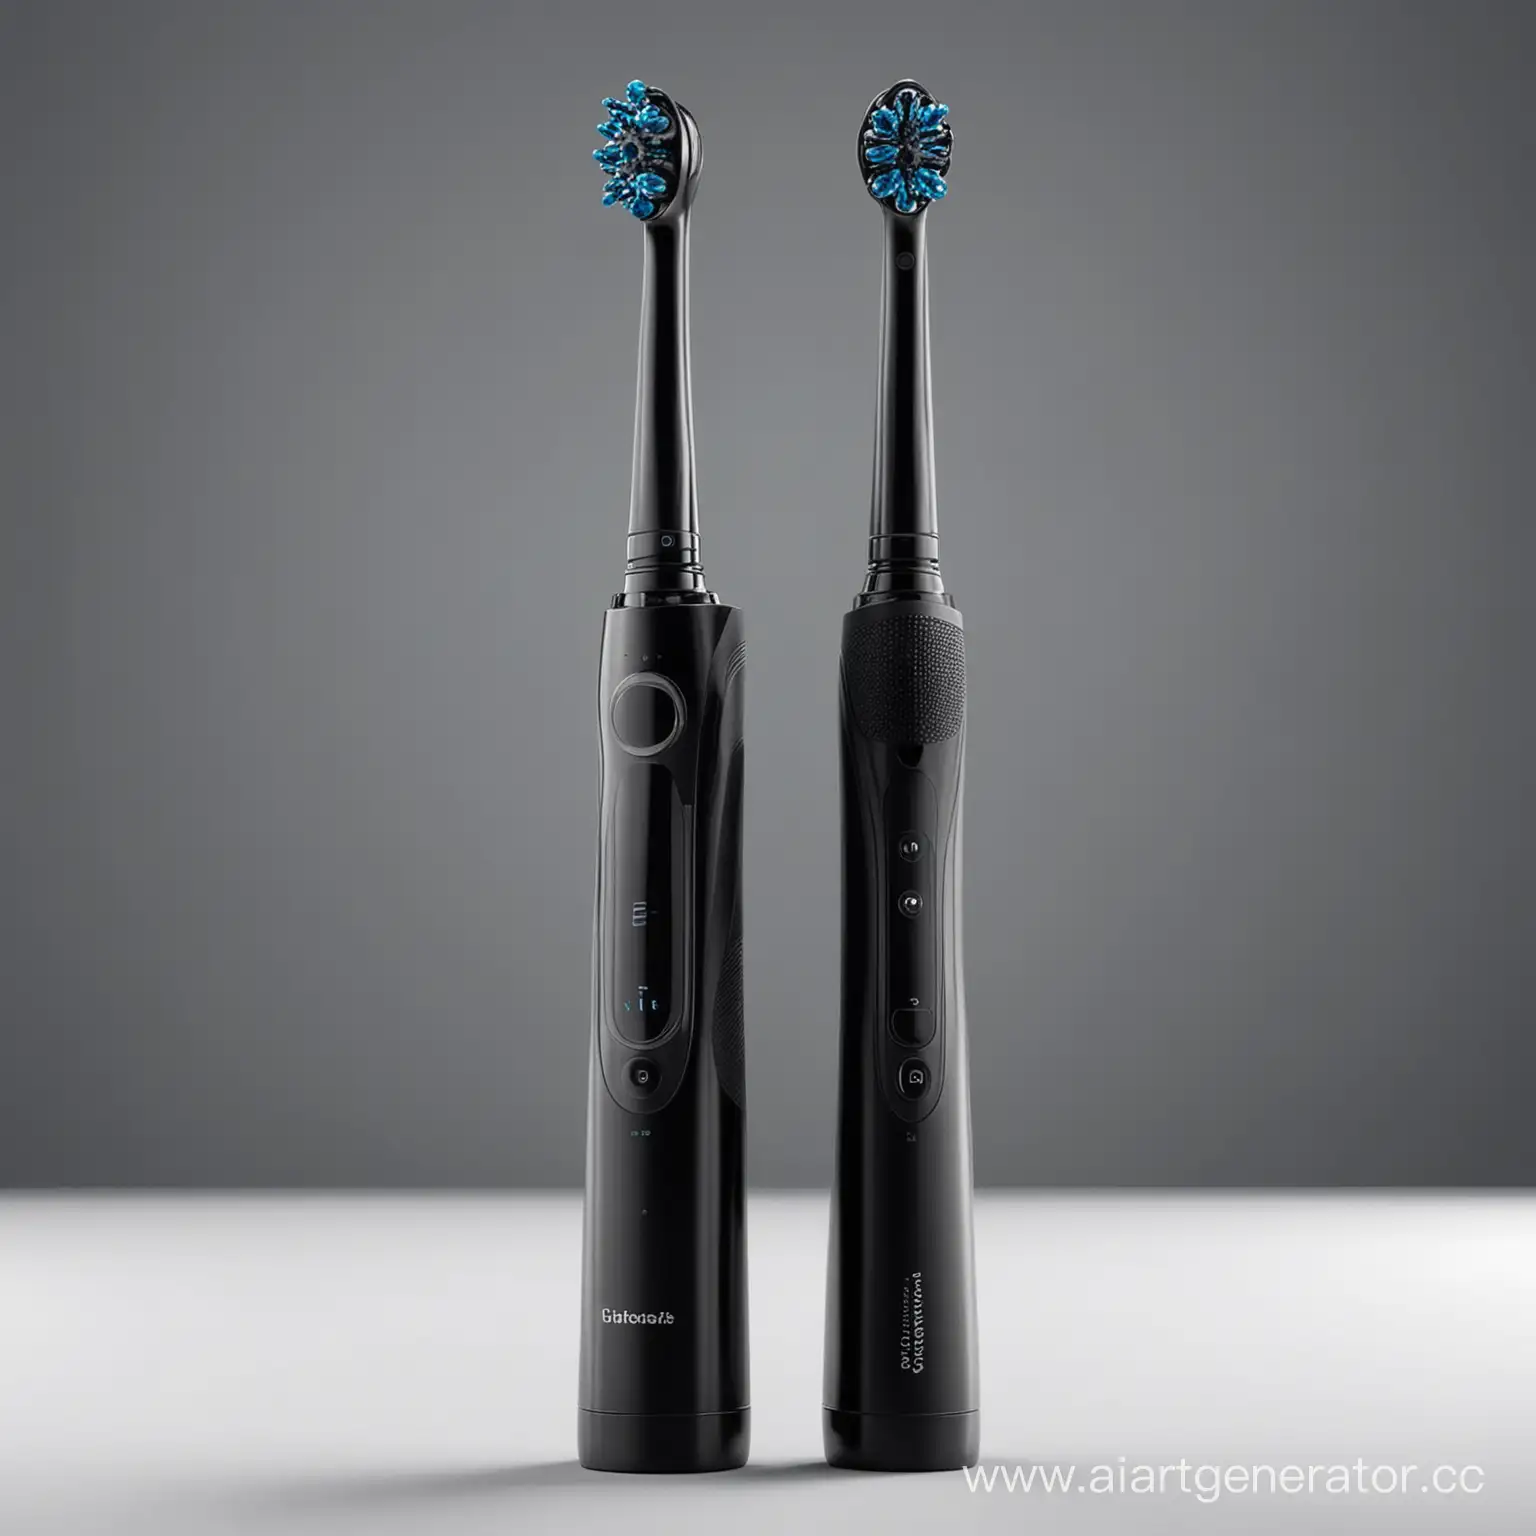 an image of a black electric toothbrush that looks like a satisfier  in the style of a hyper-realistic product photo 4k quality 